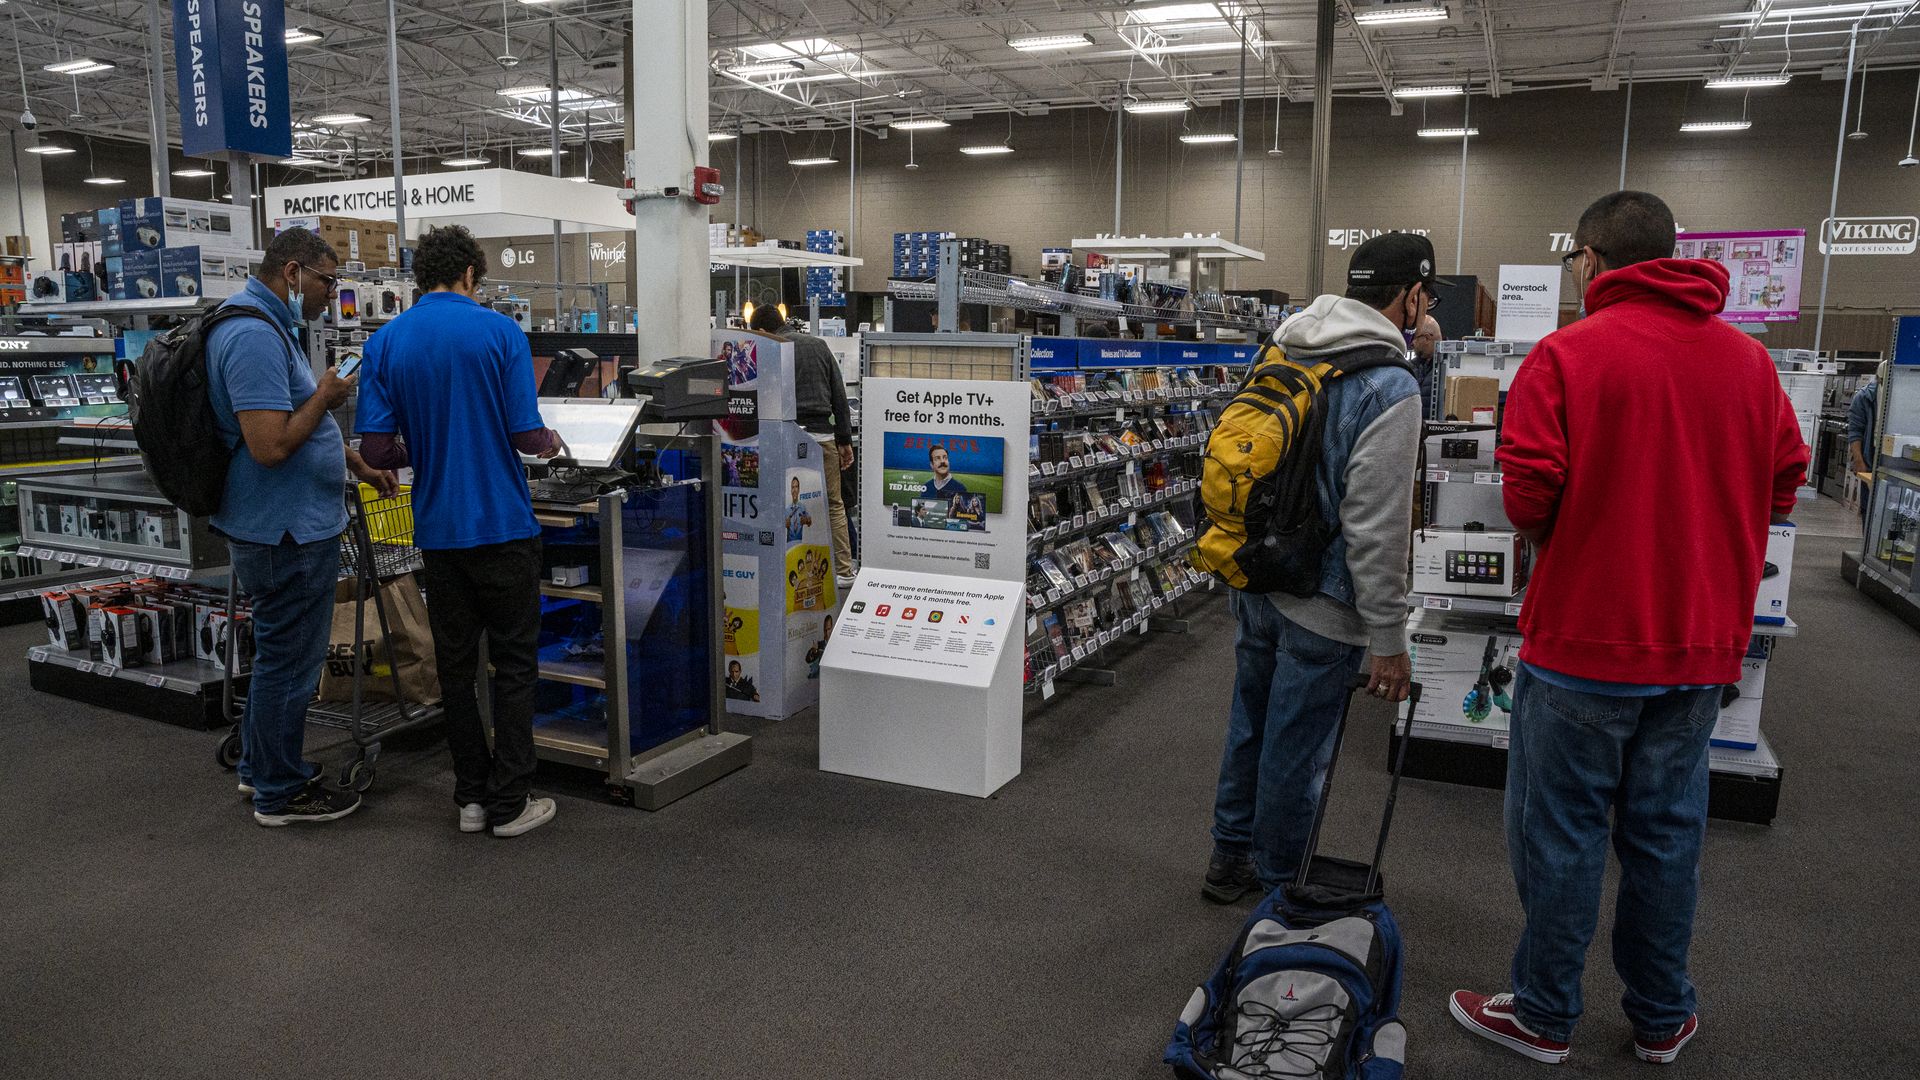 Best Buy's future plans include closing stores and shrinking floors - Axios  Twin Cities